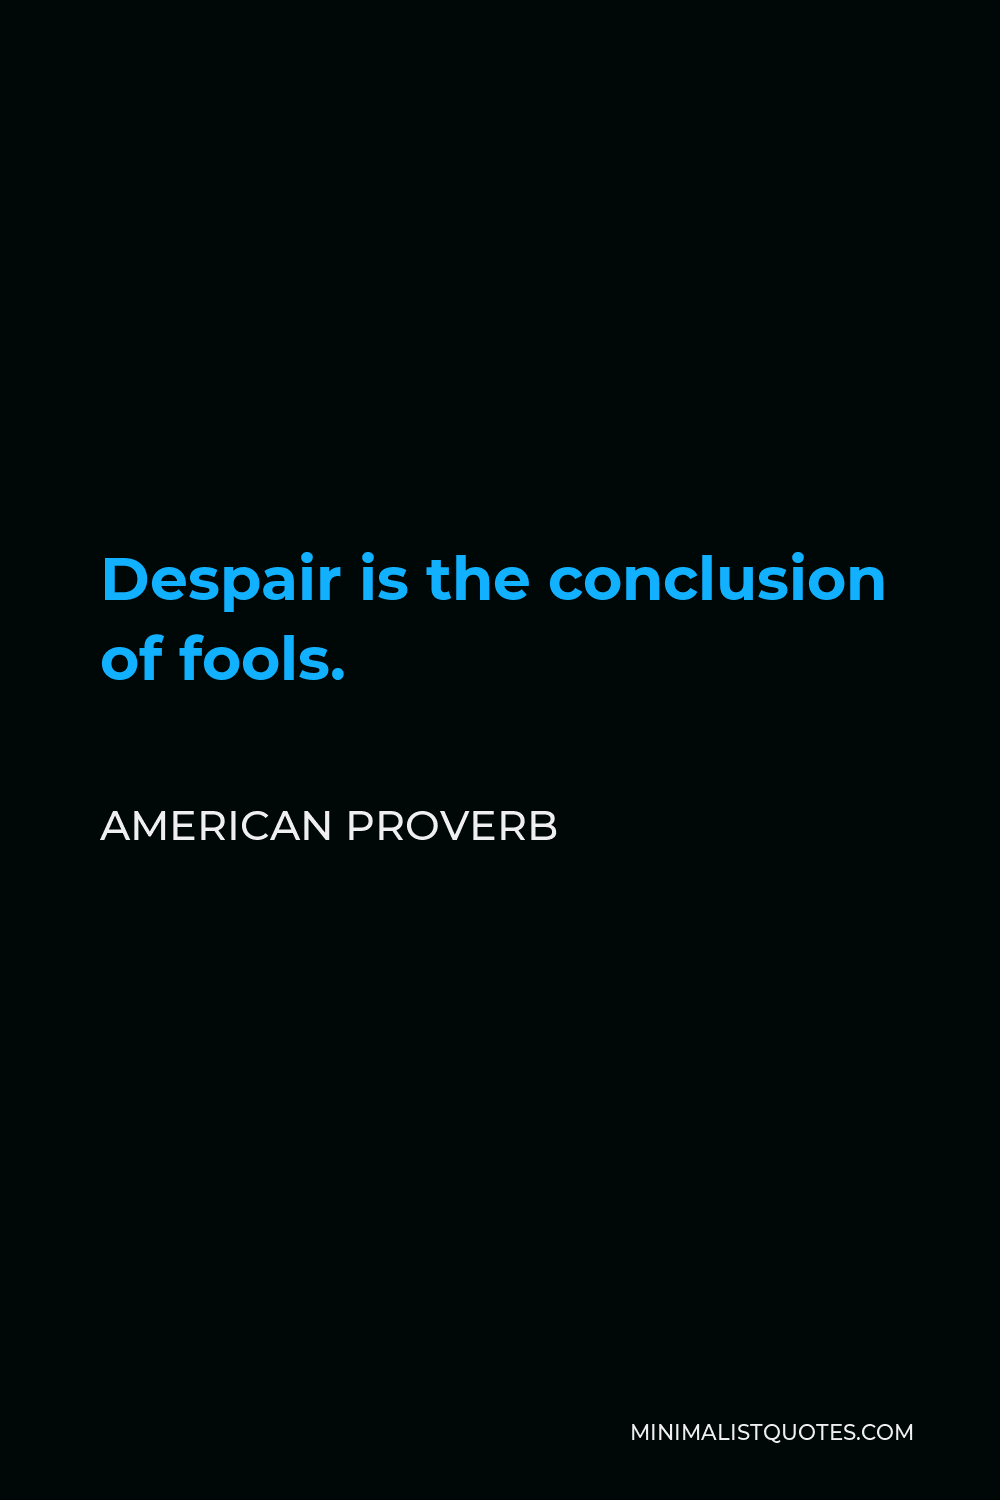 American Proverb Quote - Despair is the conclusion of fools.